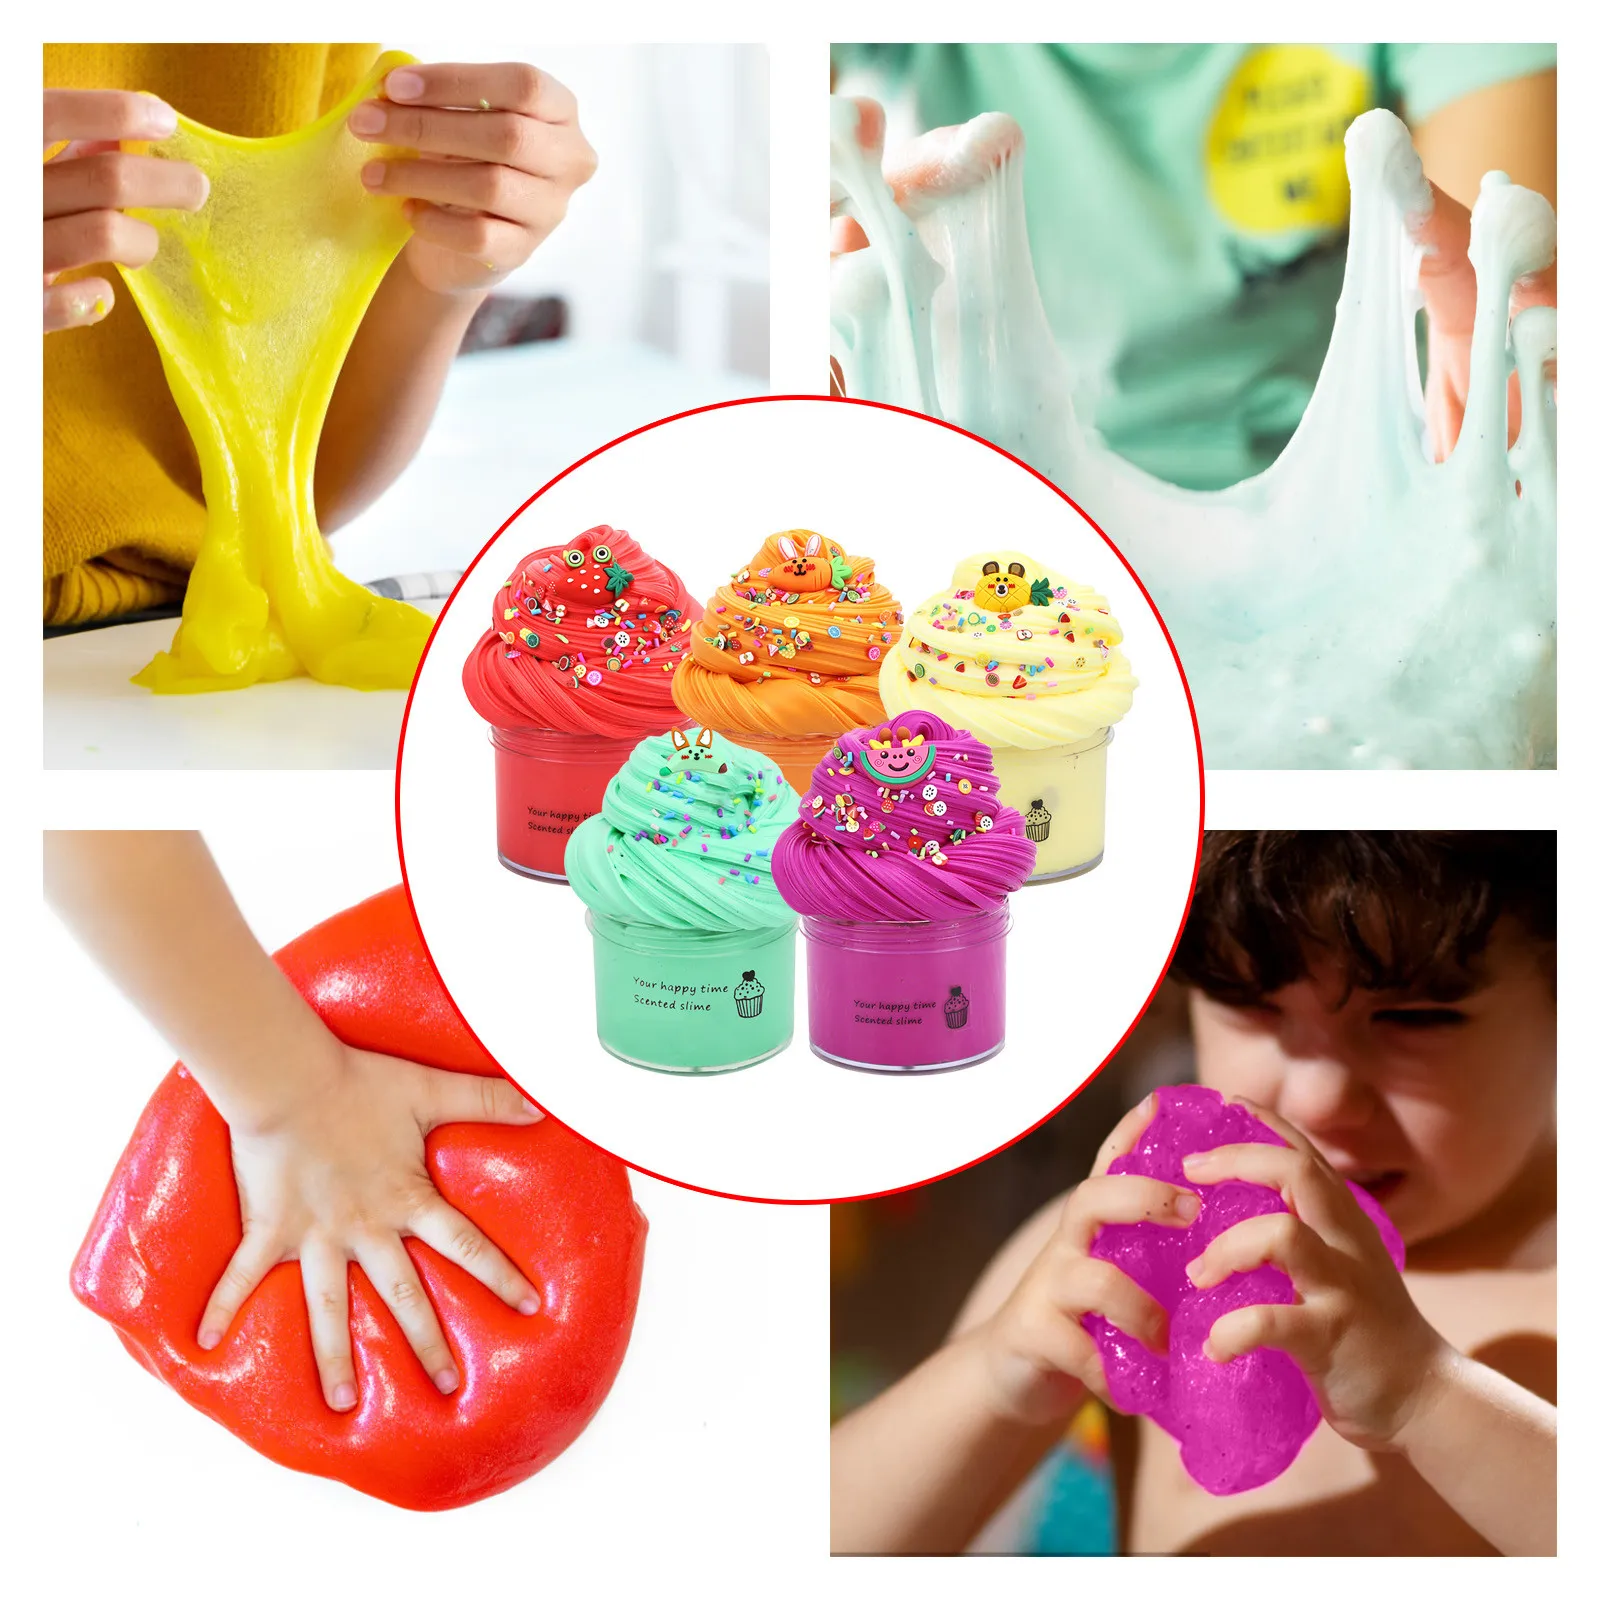 mochis squishy toys DIY Butter Slime Fruit Kit Soft Non-sticky Cloud Slime Scented Toy Kids Gift 70ml Relieve Pressure Education Rainbow Slime Craft snapper fidget toy